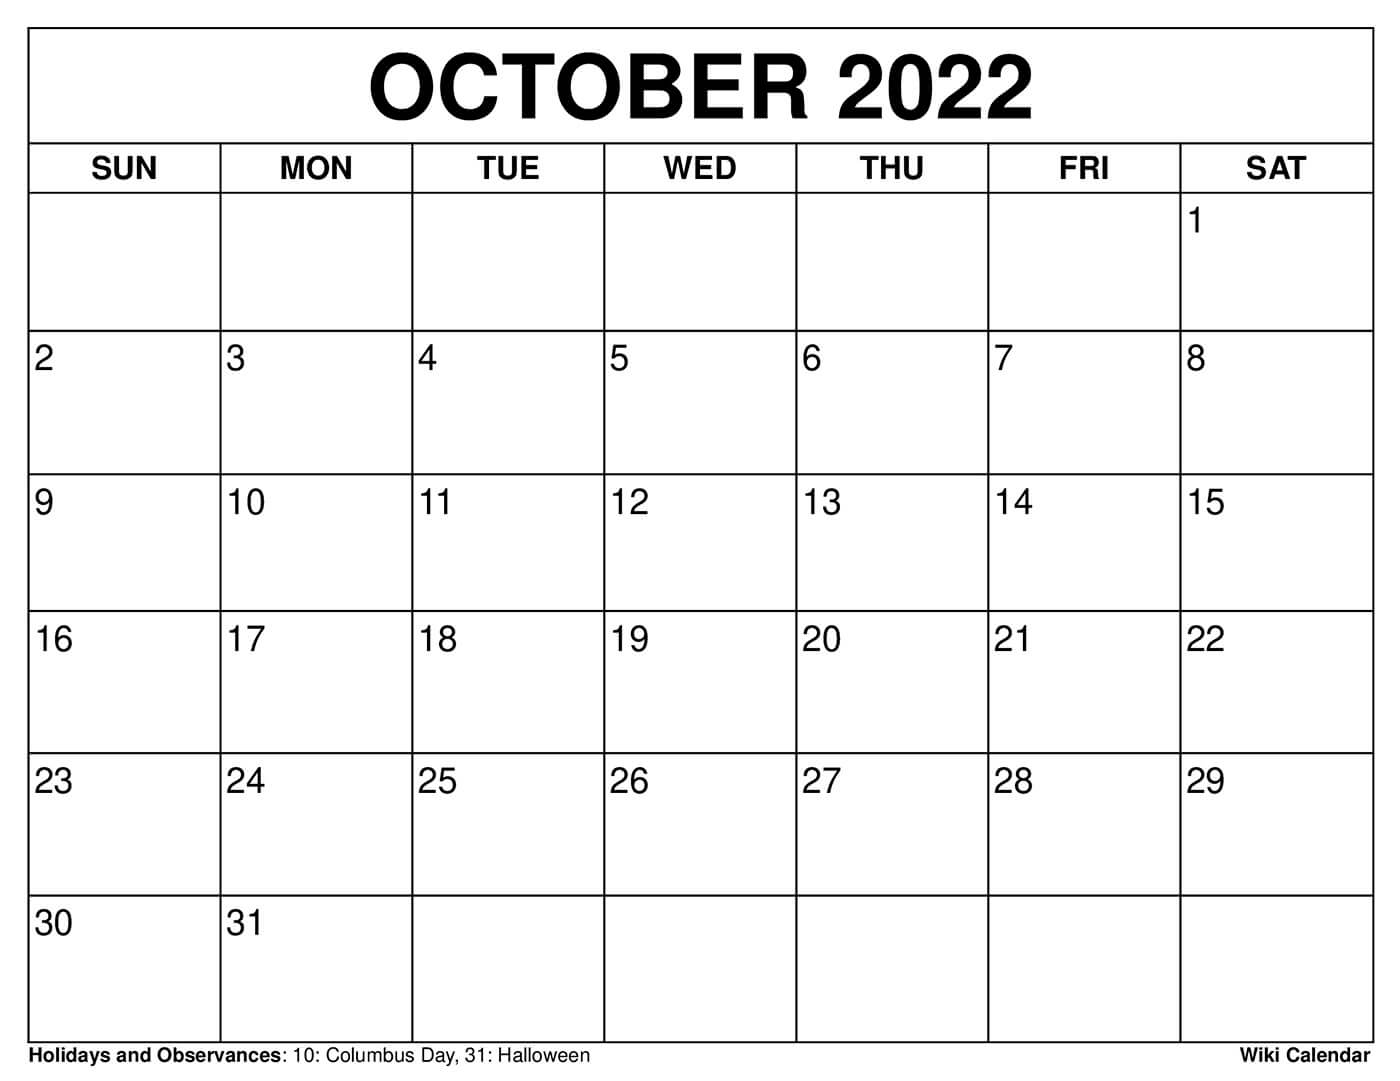 Free Printable Monthly Calendar October 2022 Free Printable October 2022 Calendars - Wiki Calendar